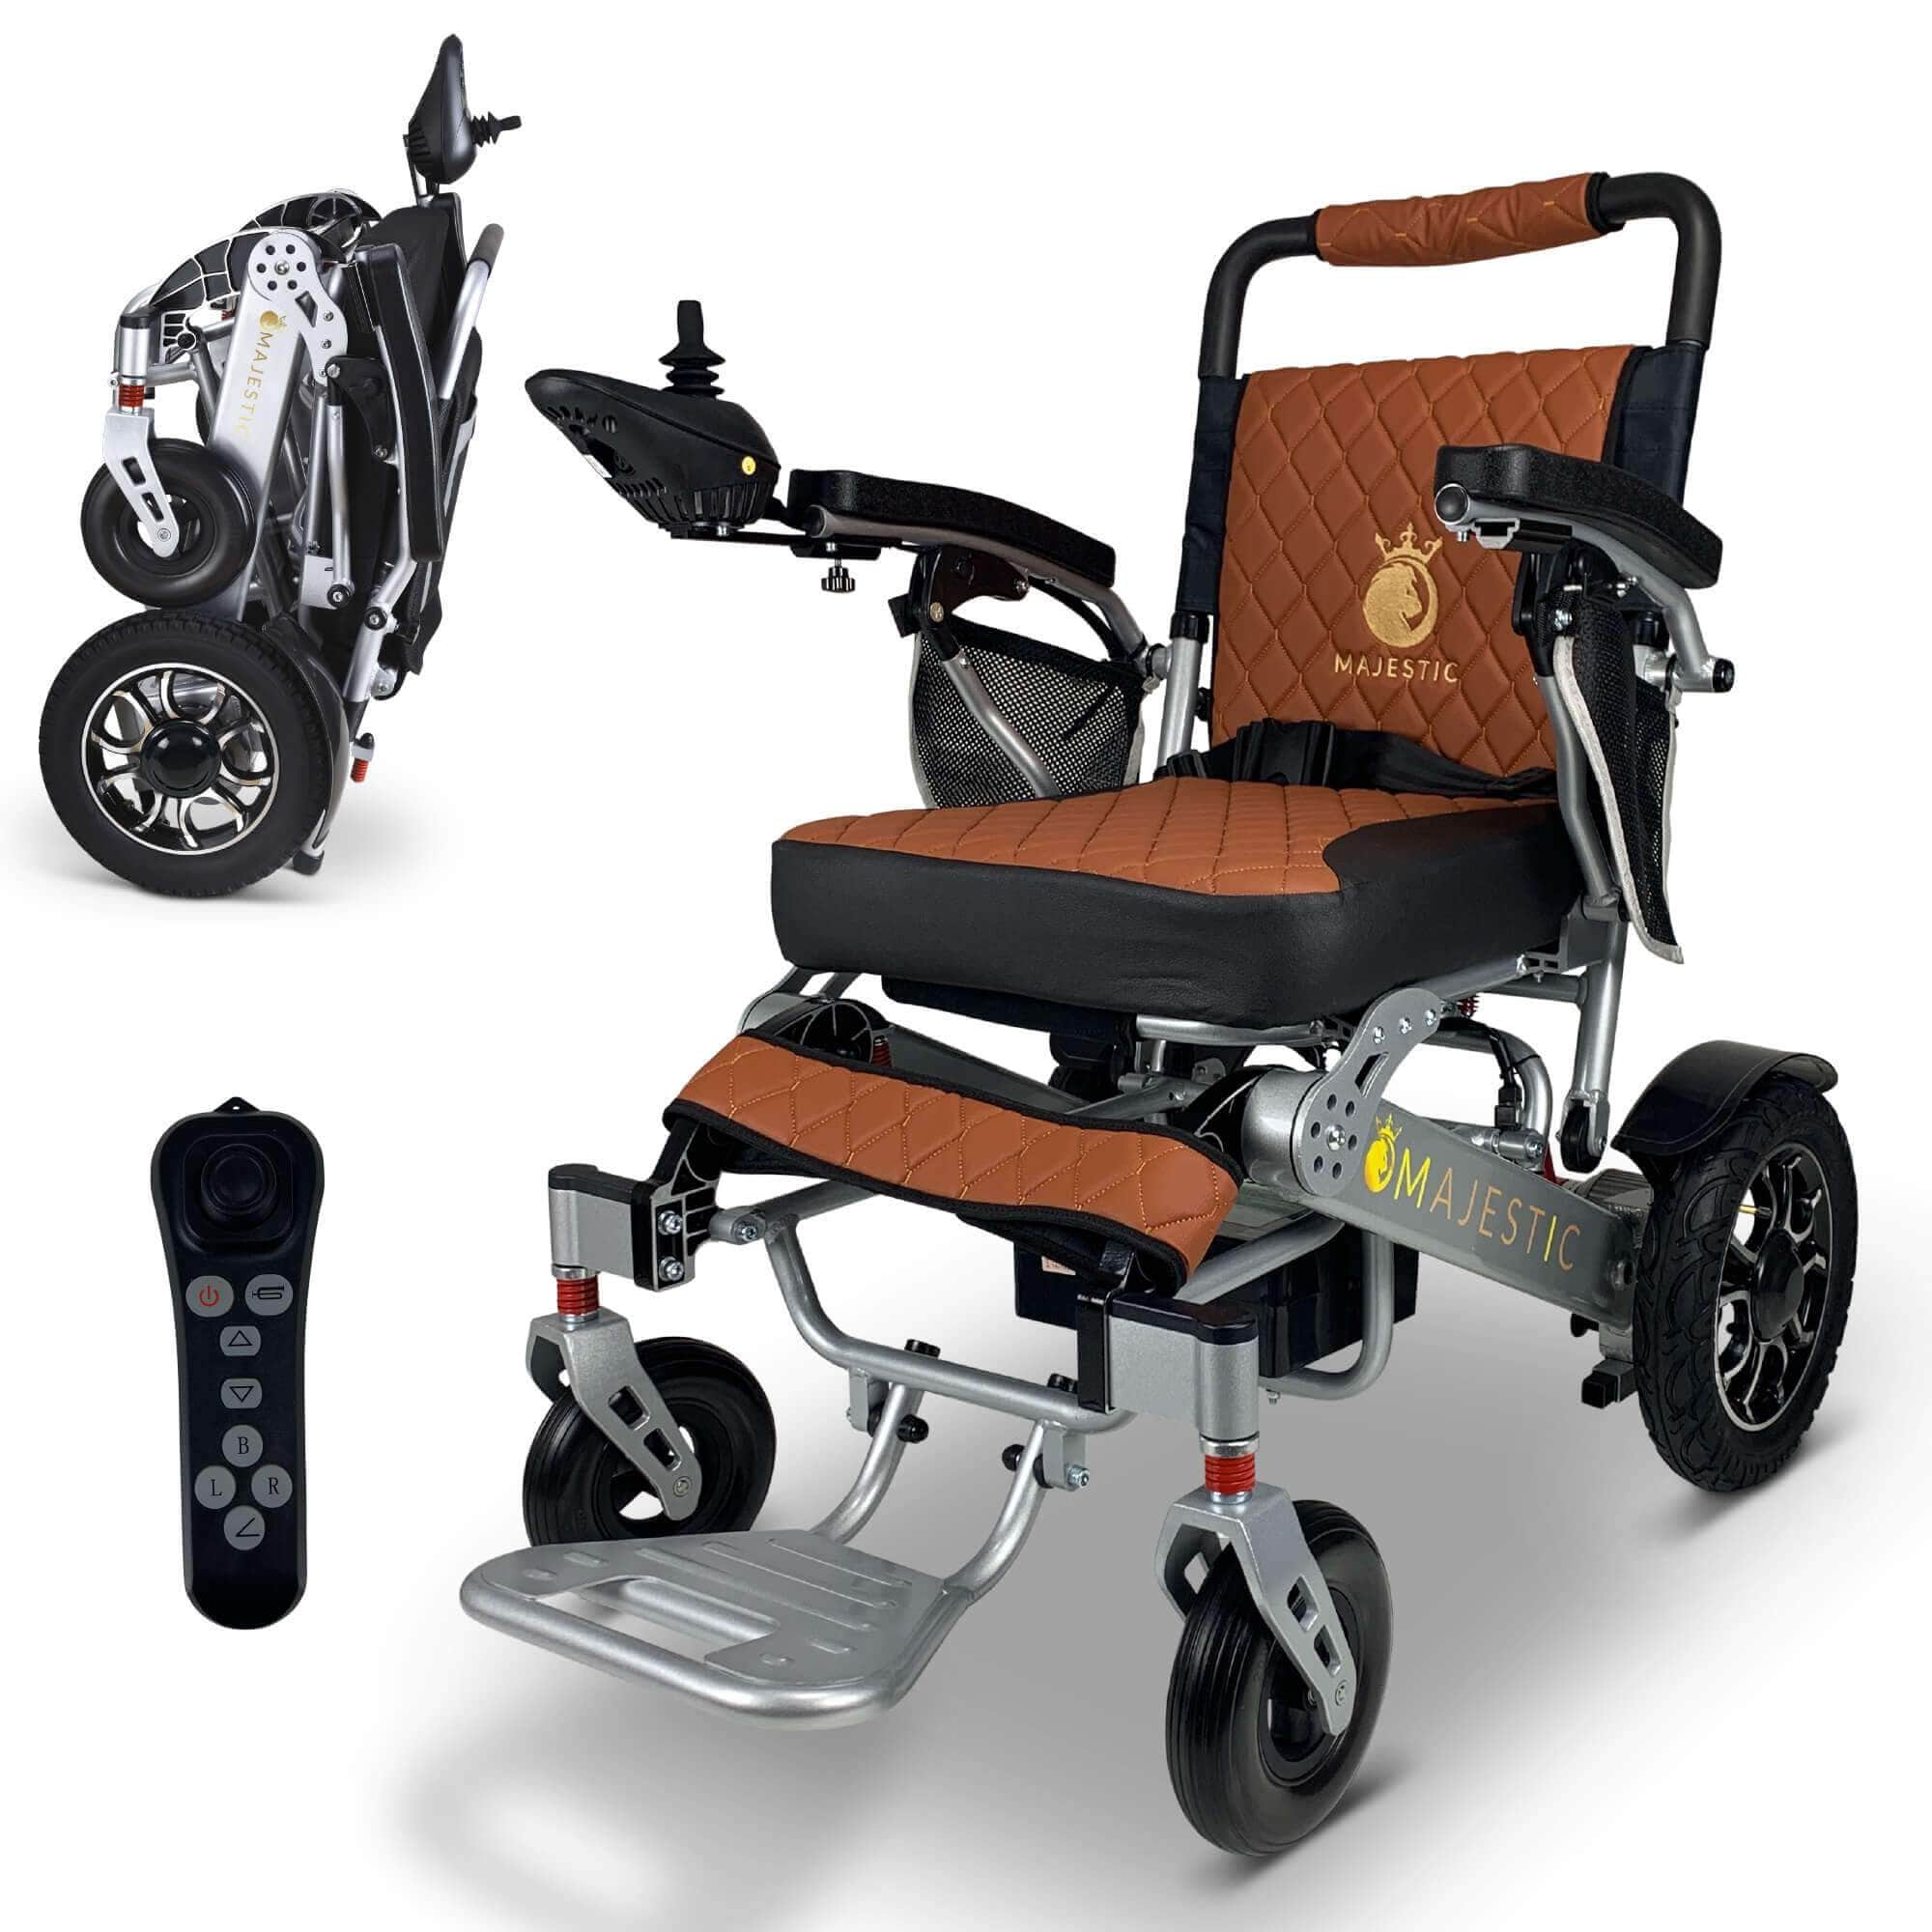 ComfyGo Majestic 12Ah 250W 19" Wide Remote Controlled Folding Electric Wheelchair